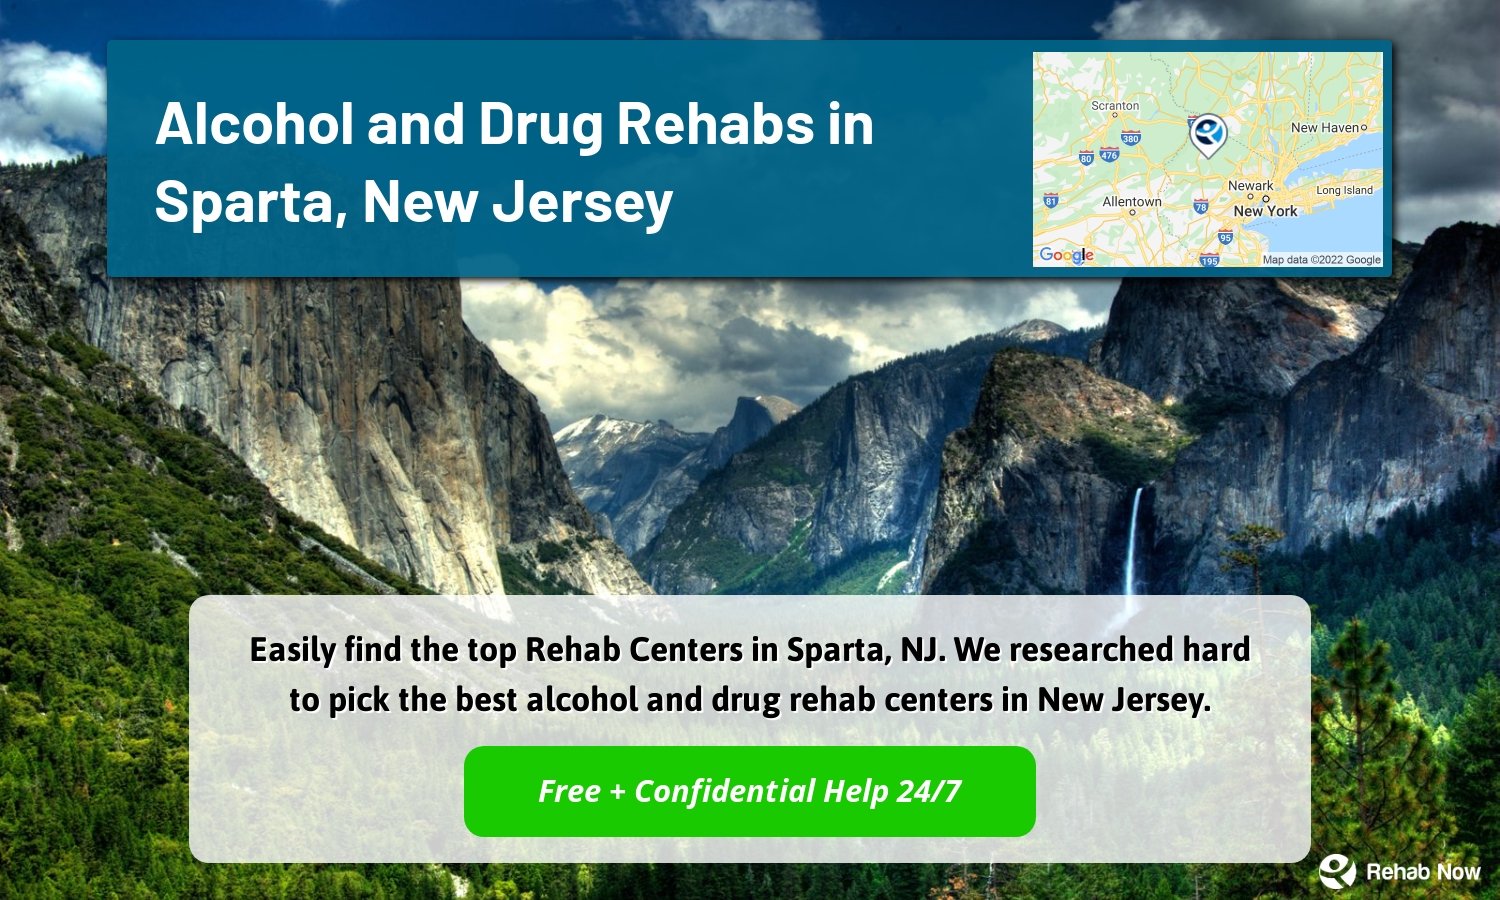 Easily find the top Rehab Centers in Sparta, NJ. We researched hard to pick the best alcohol and drug rehab centers in New Jersey.